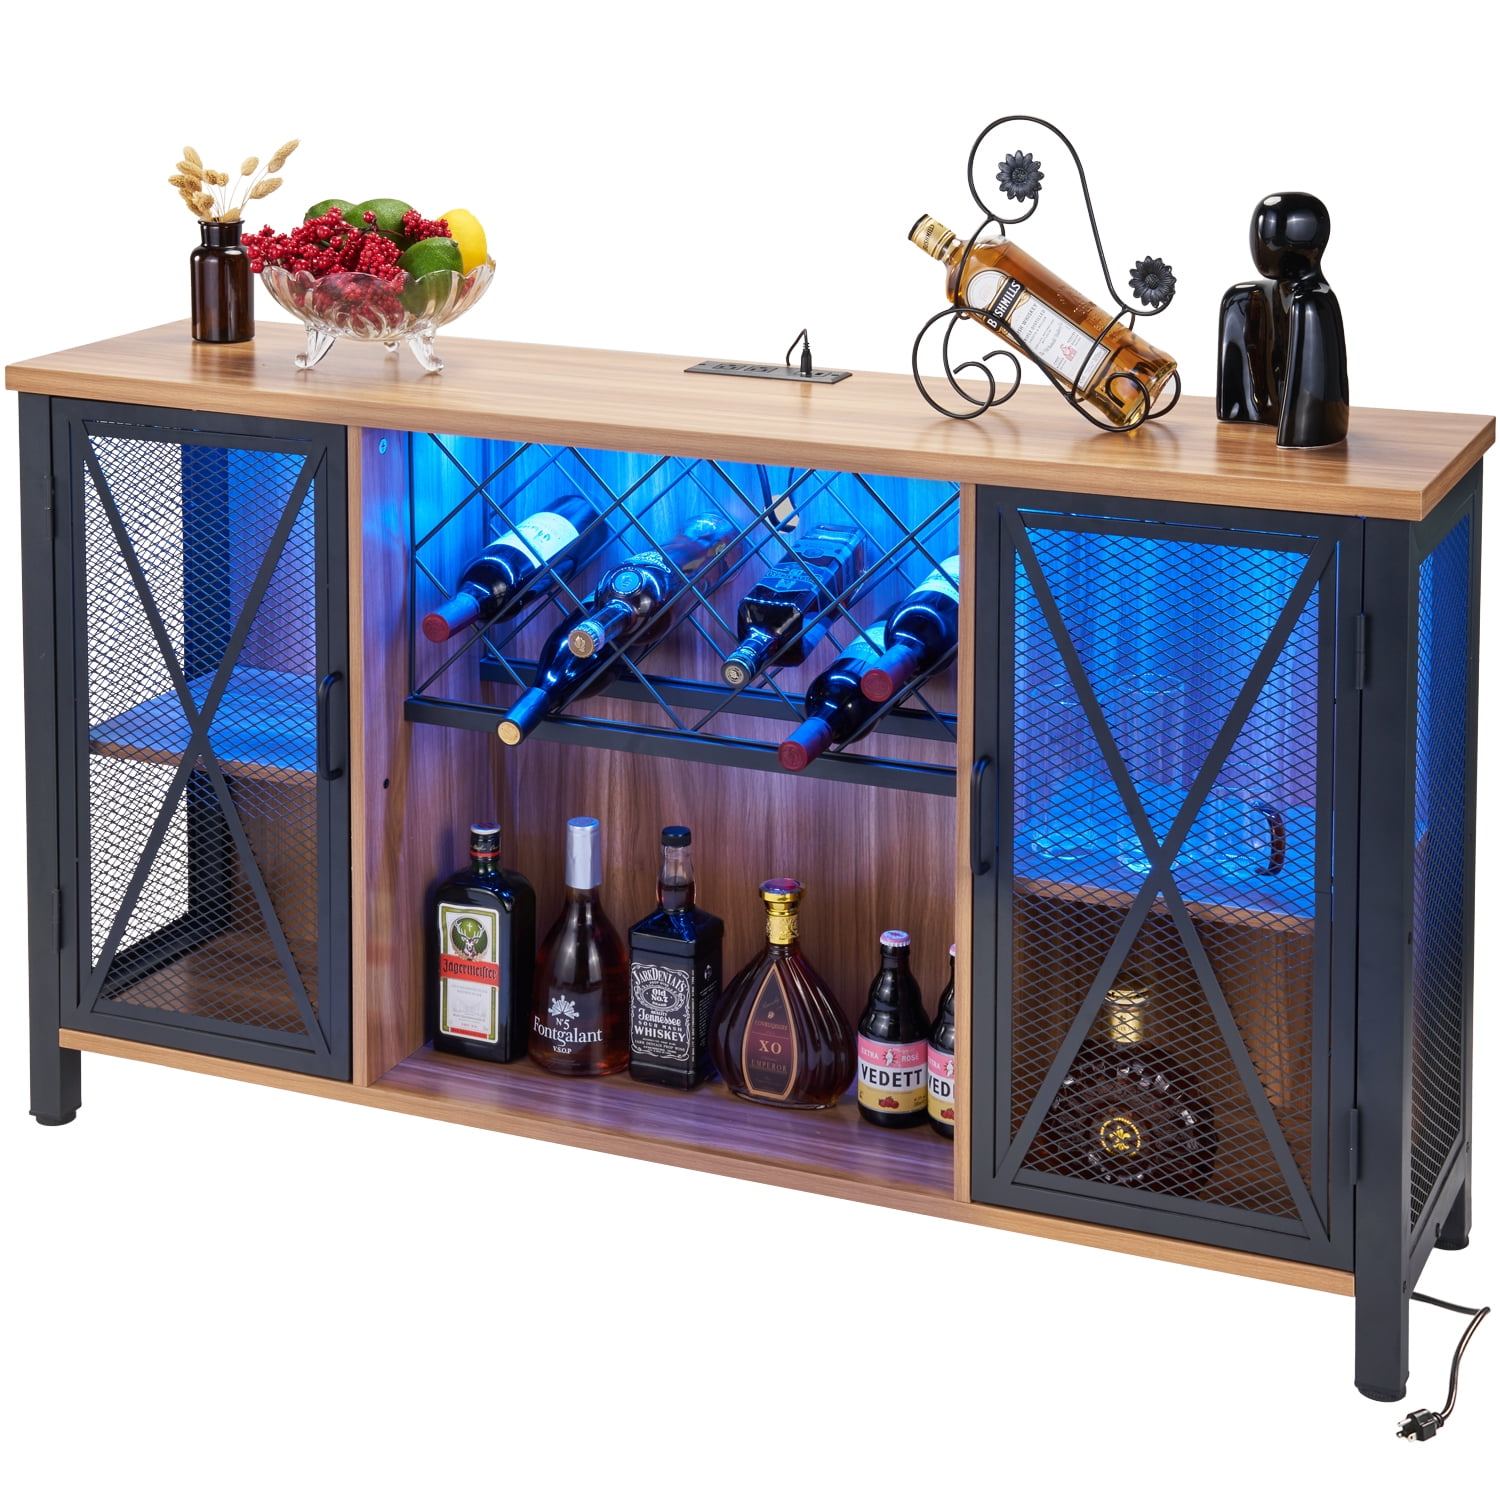 Wine Cabinet Power Outlet Light LED Bar Stand Liquor Glasses Industrial Home Coffee Kitchen Dining Room Living Brown 0ced323c 51d7 412d Aa5b 5fa7b06f9e50.1fad8410ad176904503a791d14585985 